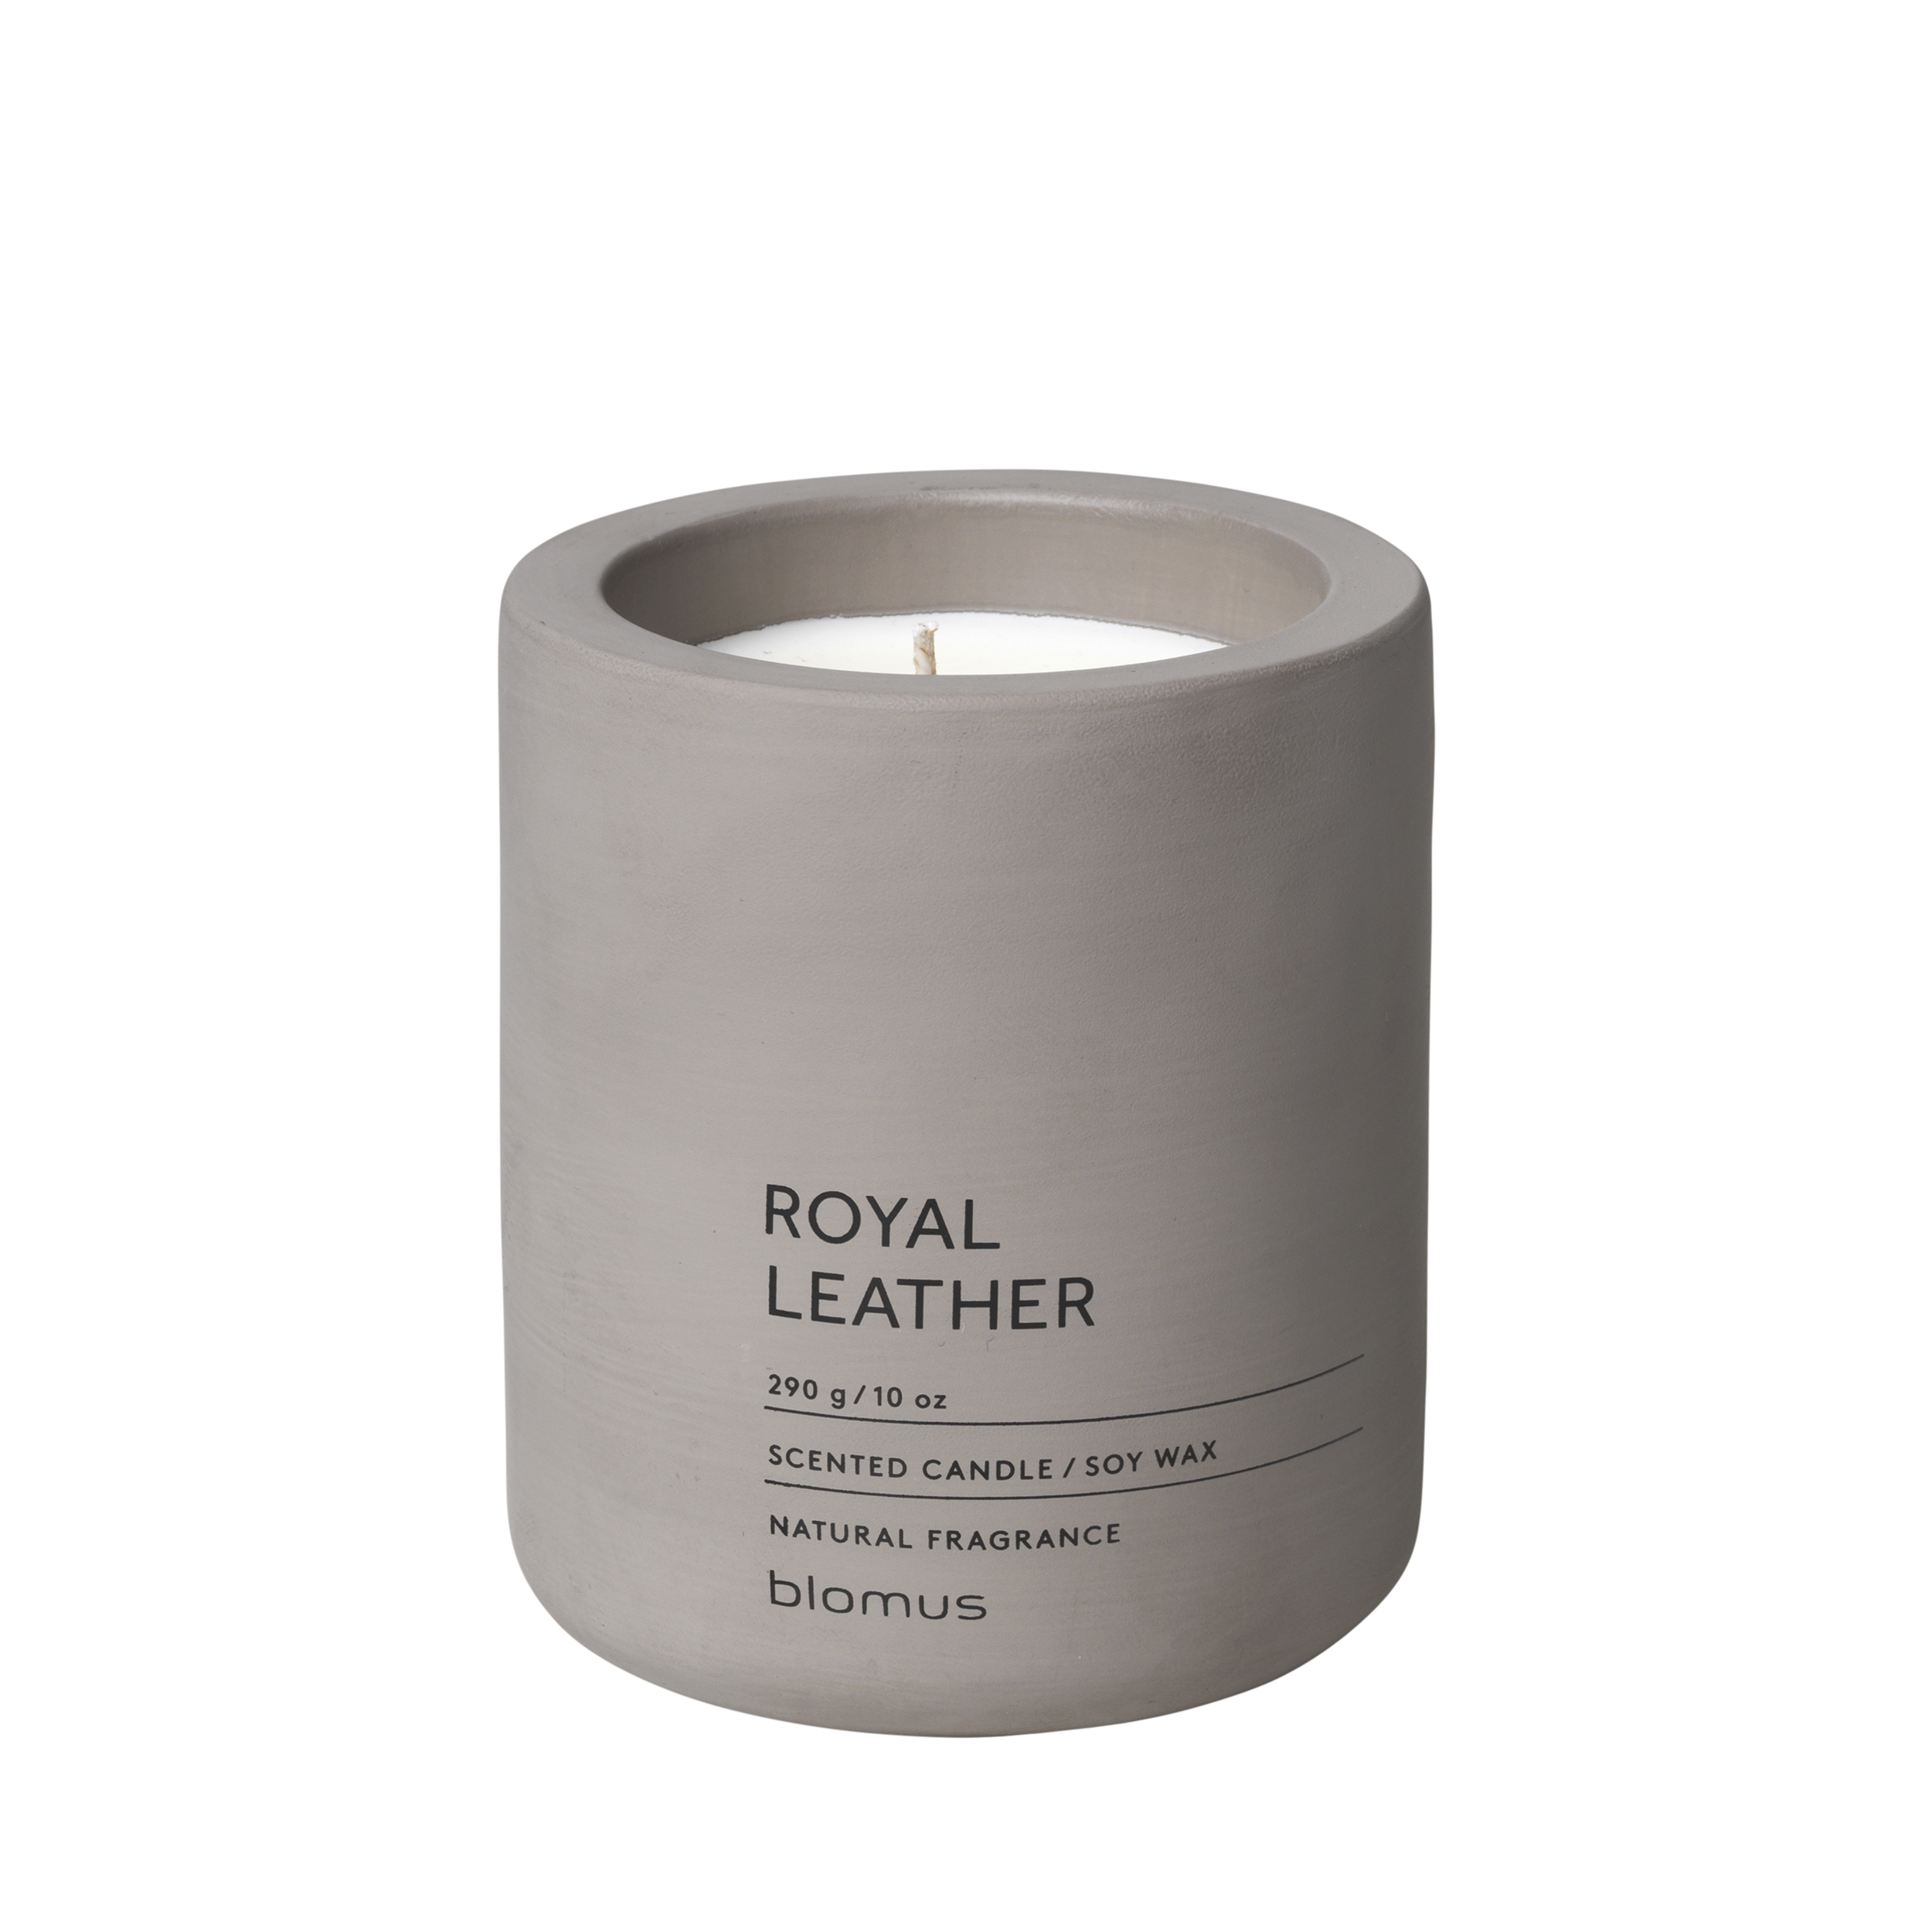 Blomus Royal Leather Large Scented Candle